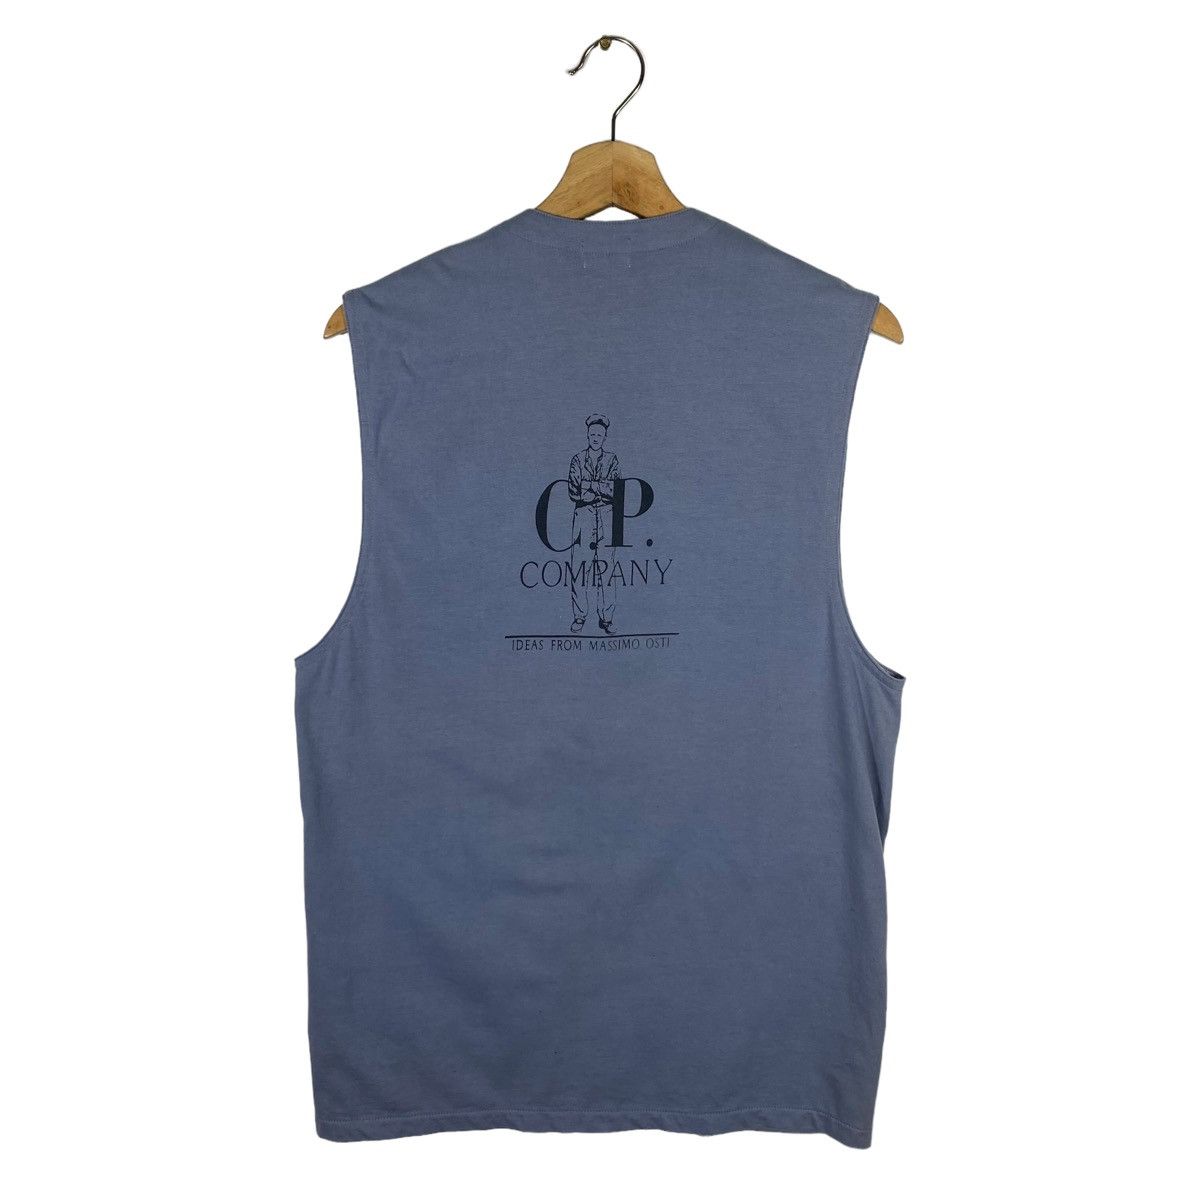 Vintage 90s Cp Company Ideas From Massimo Osti Vest - 1